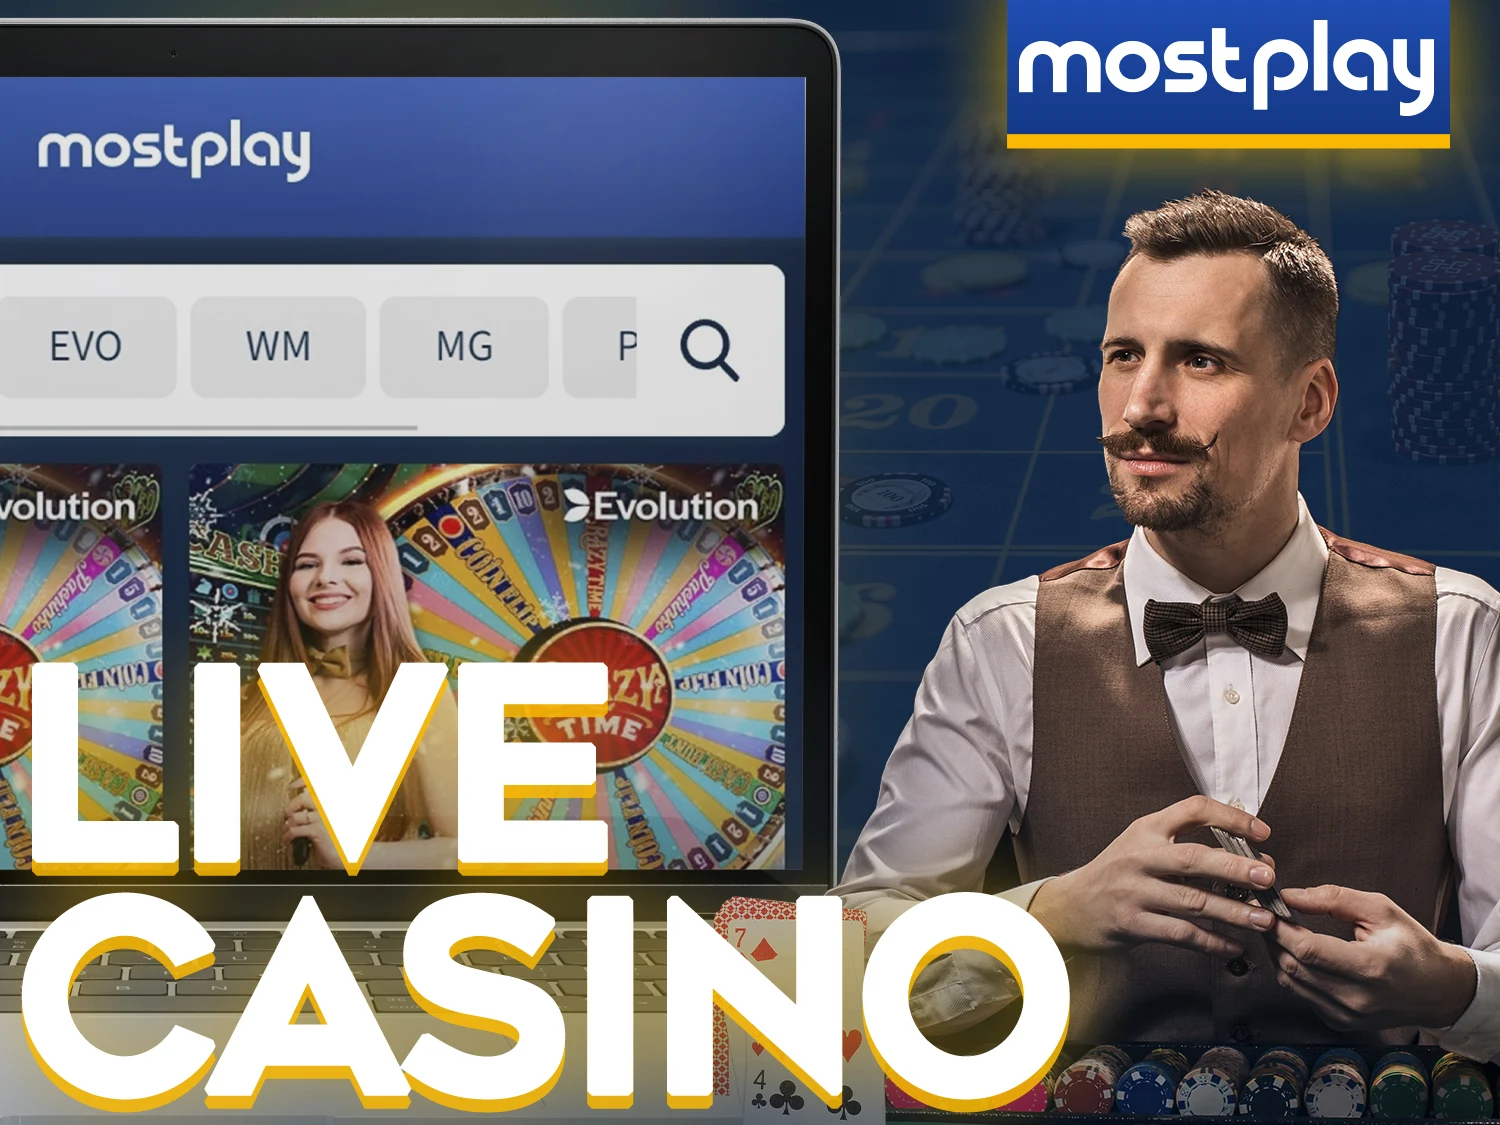 Play casino games at the Mostplay casino with real people.